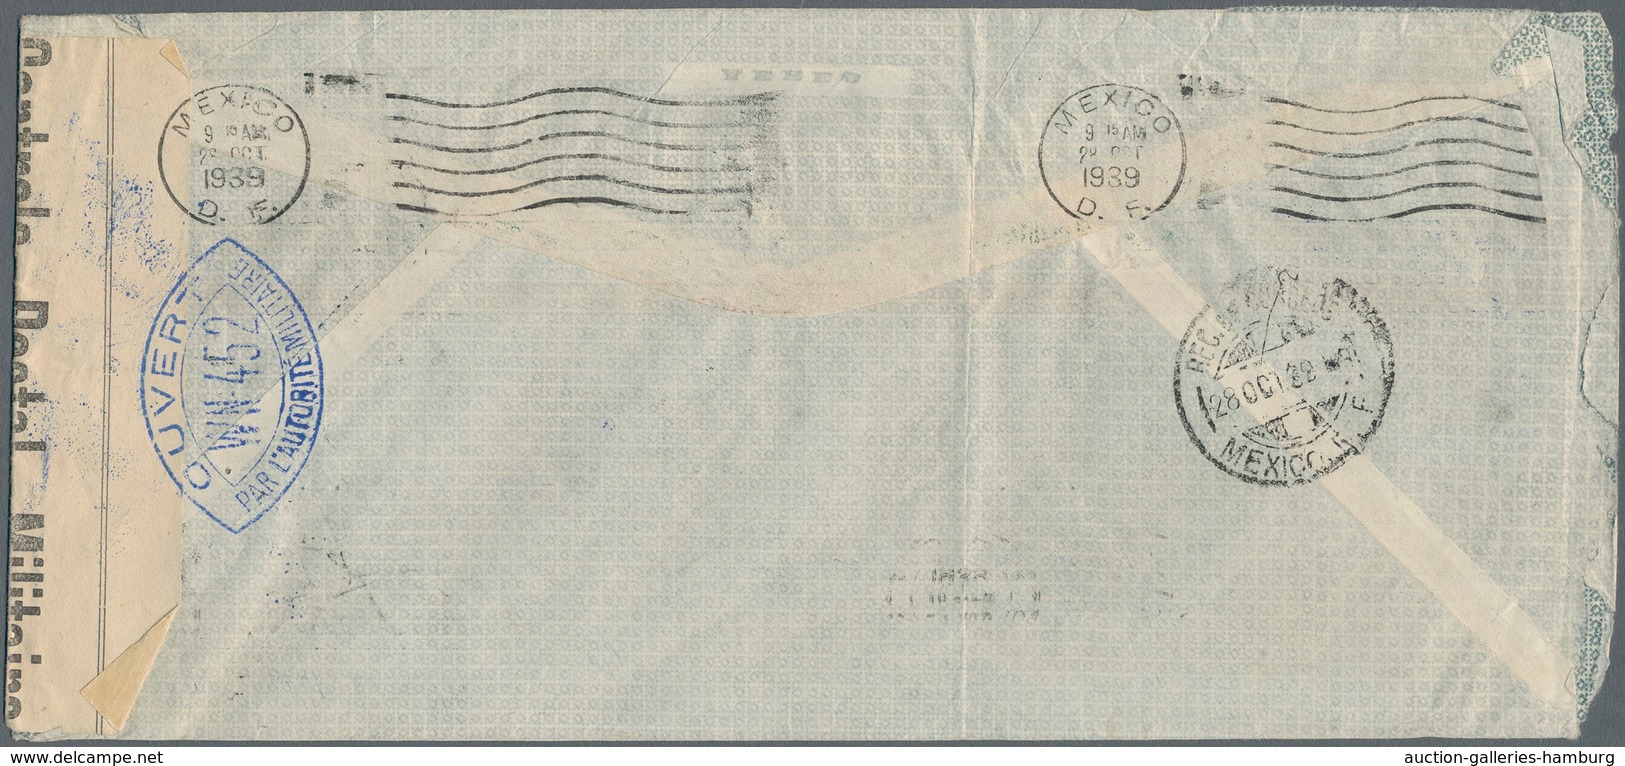 Mexiko: 1939, Airmail Cover From "MEXICO 24.AUG 39" To Nuremberg/Germany. The Airmail Route To Germa - Mexique